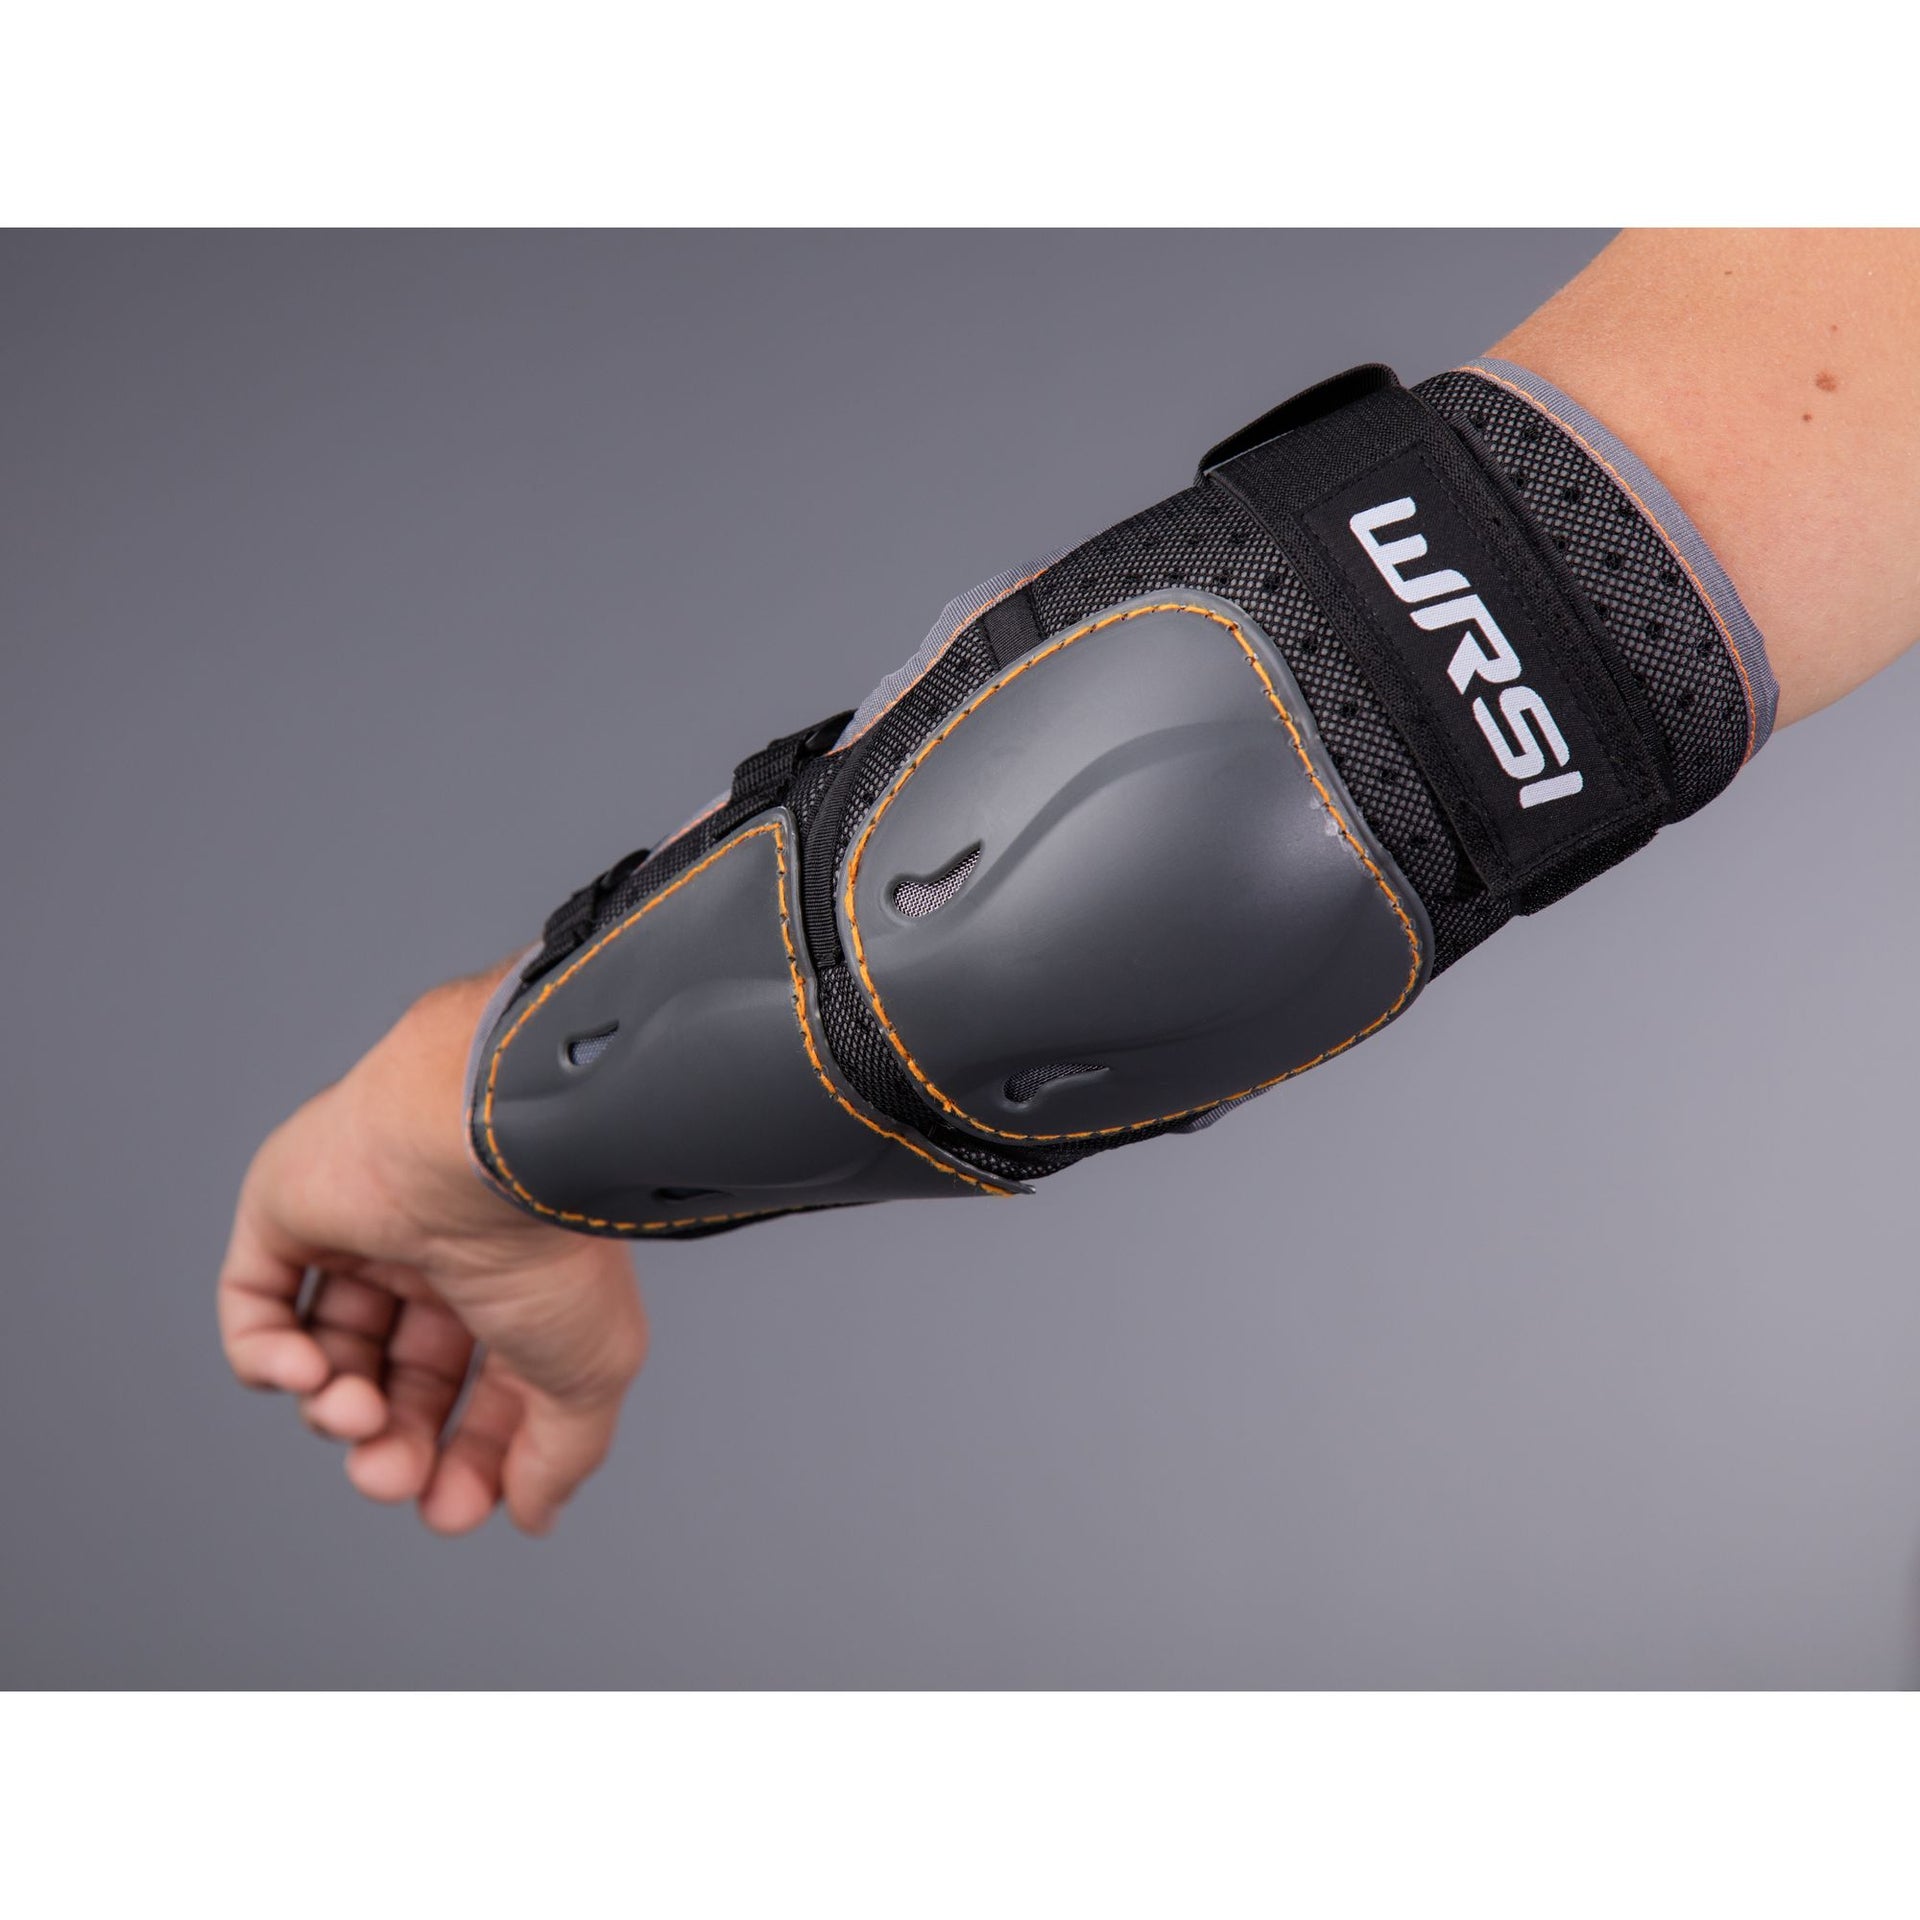 S-Turn Elbow Pads